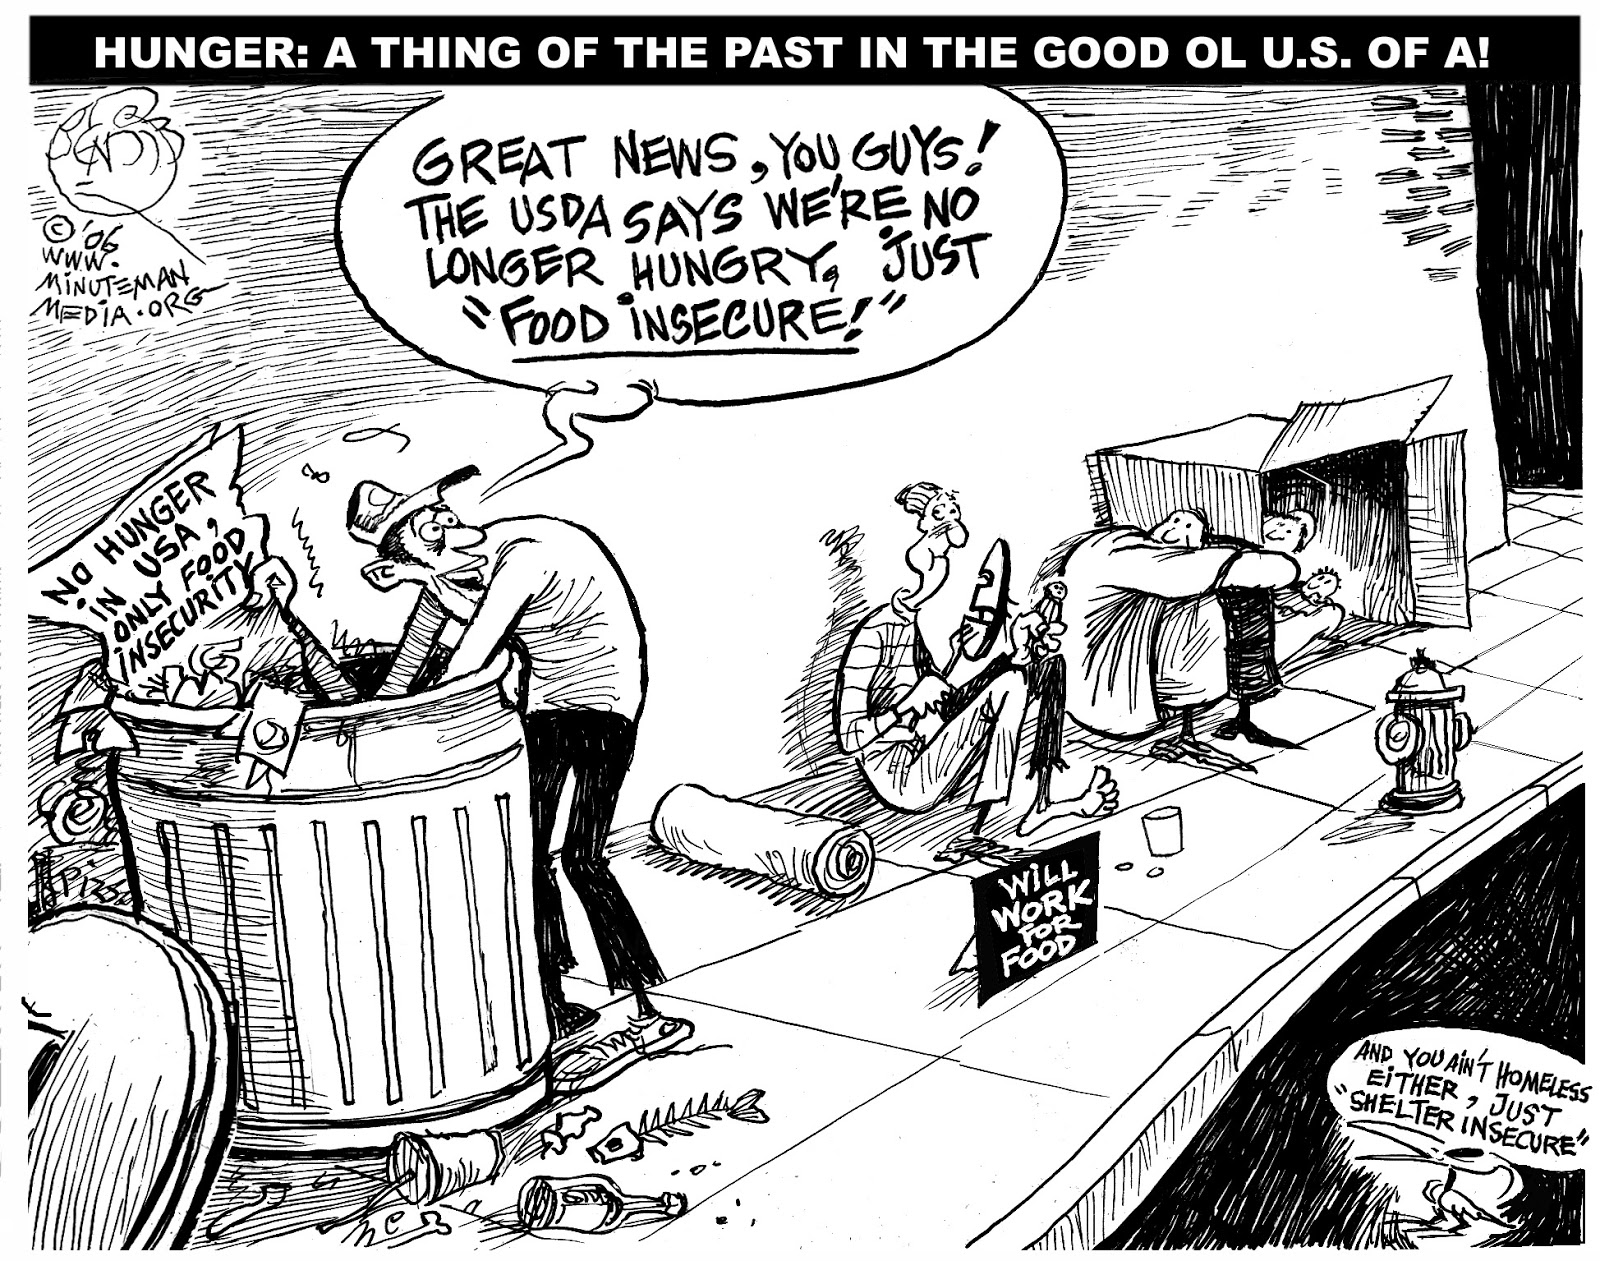 cartoon about hunger being renamed